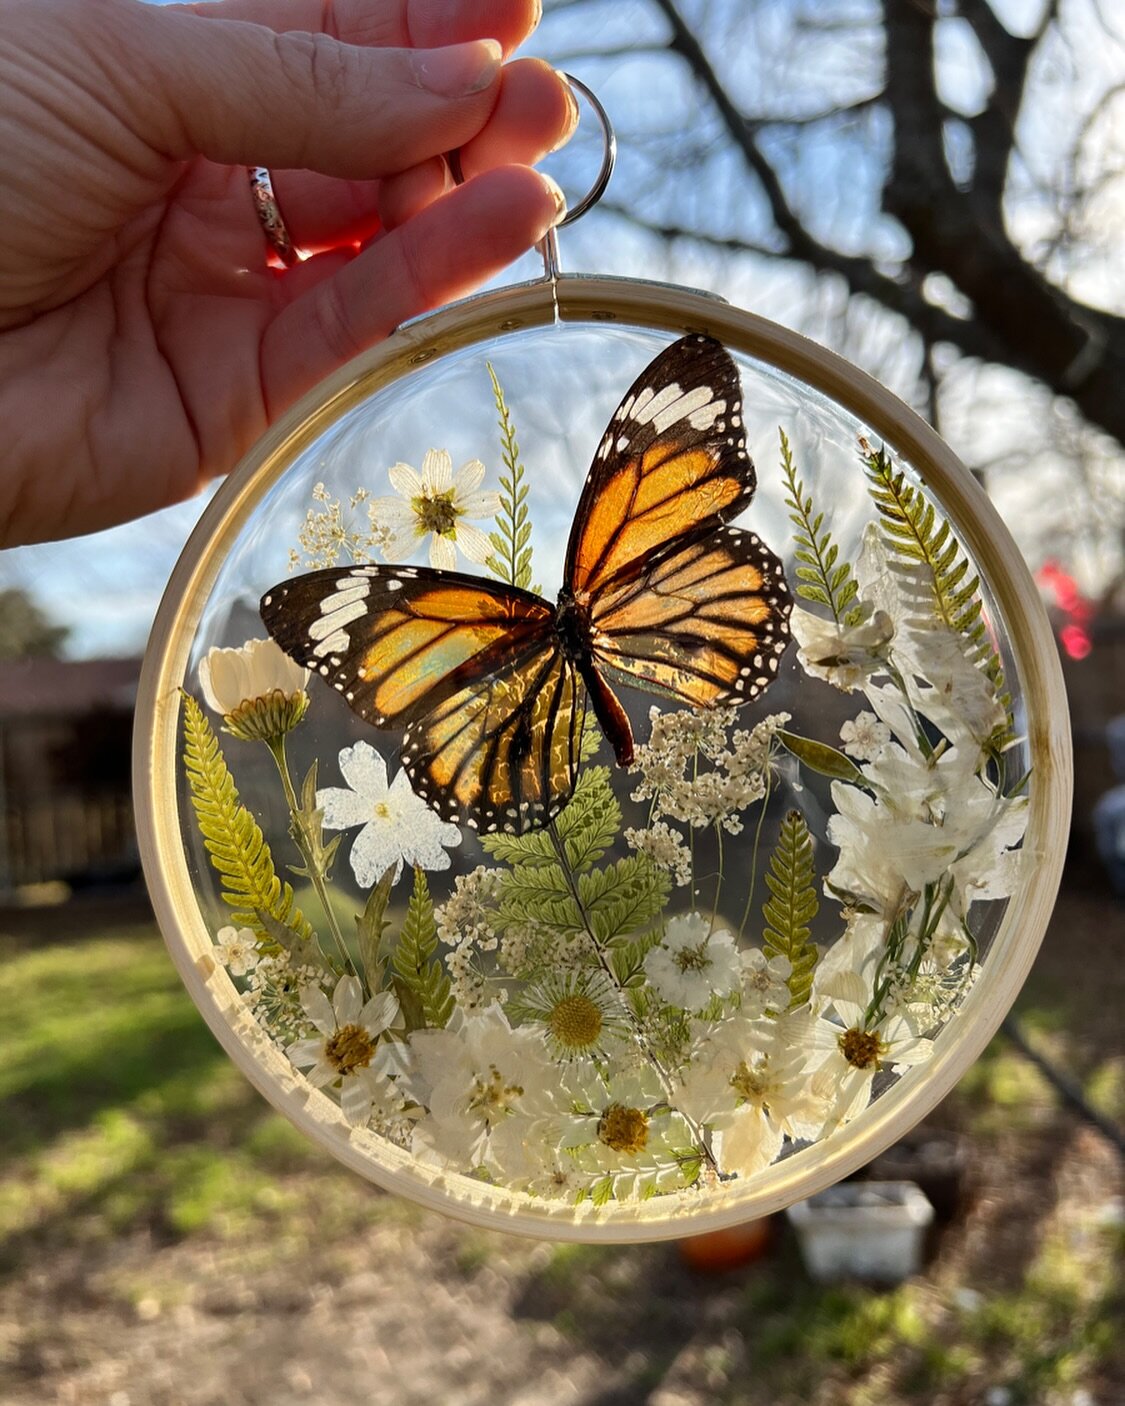 Beautiful and graceful, varied and enchanting, small but approachable, butterflies lead you to the sunny side of life. And everyone deserves a little sunshine. 🦋🌞

Behold the graceful Common Tiger butterfly, forever floating in a field of white flo